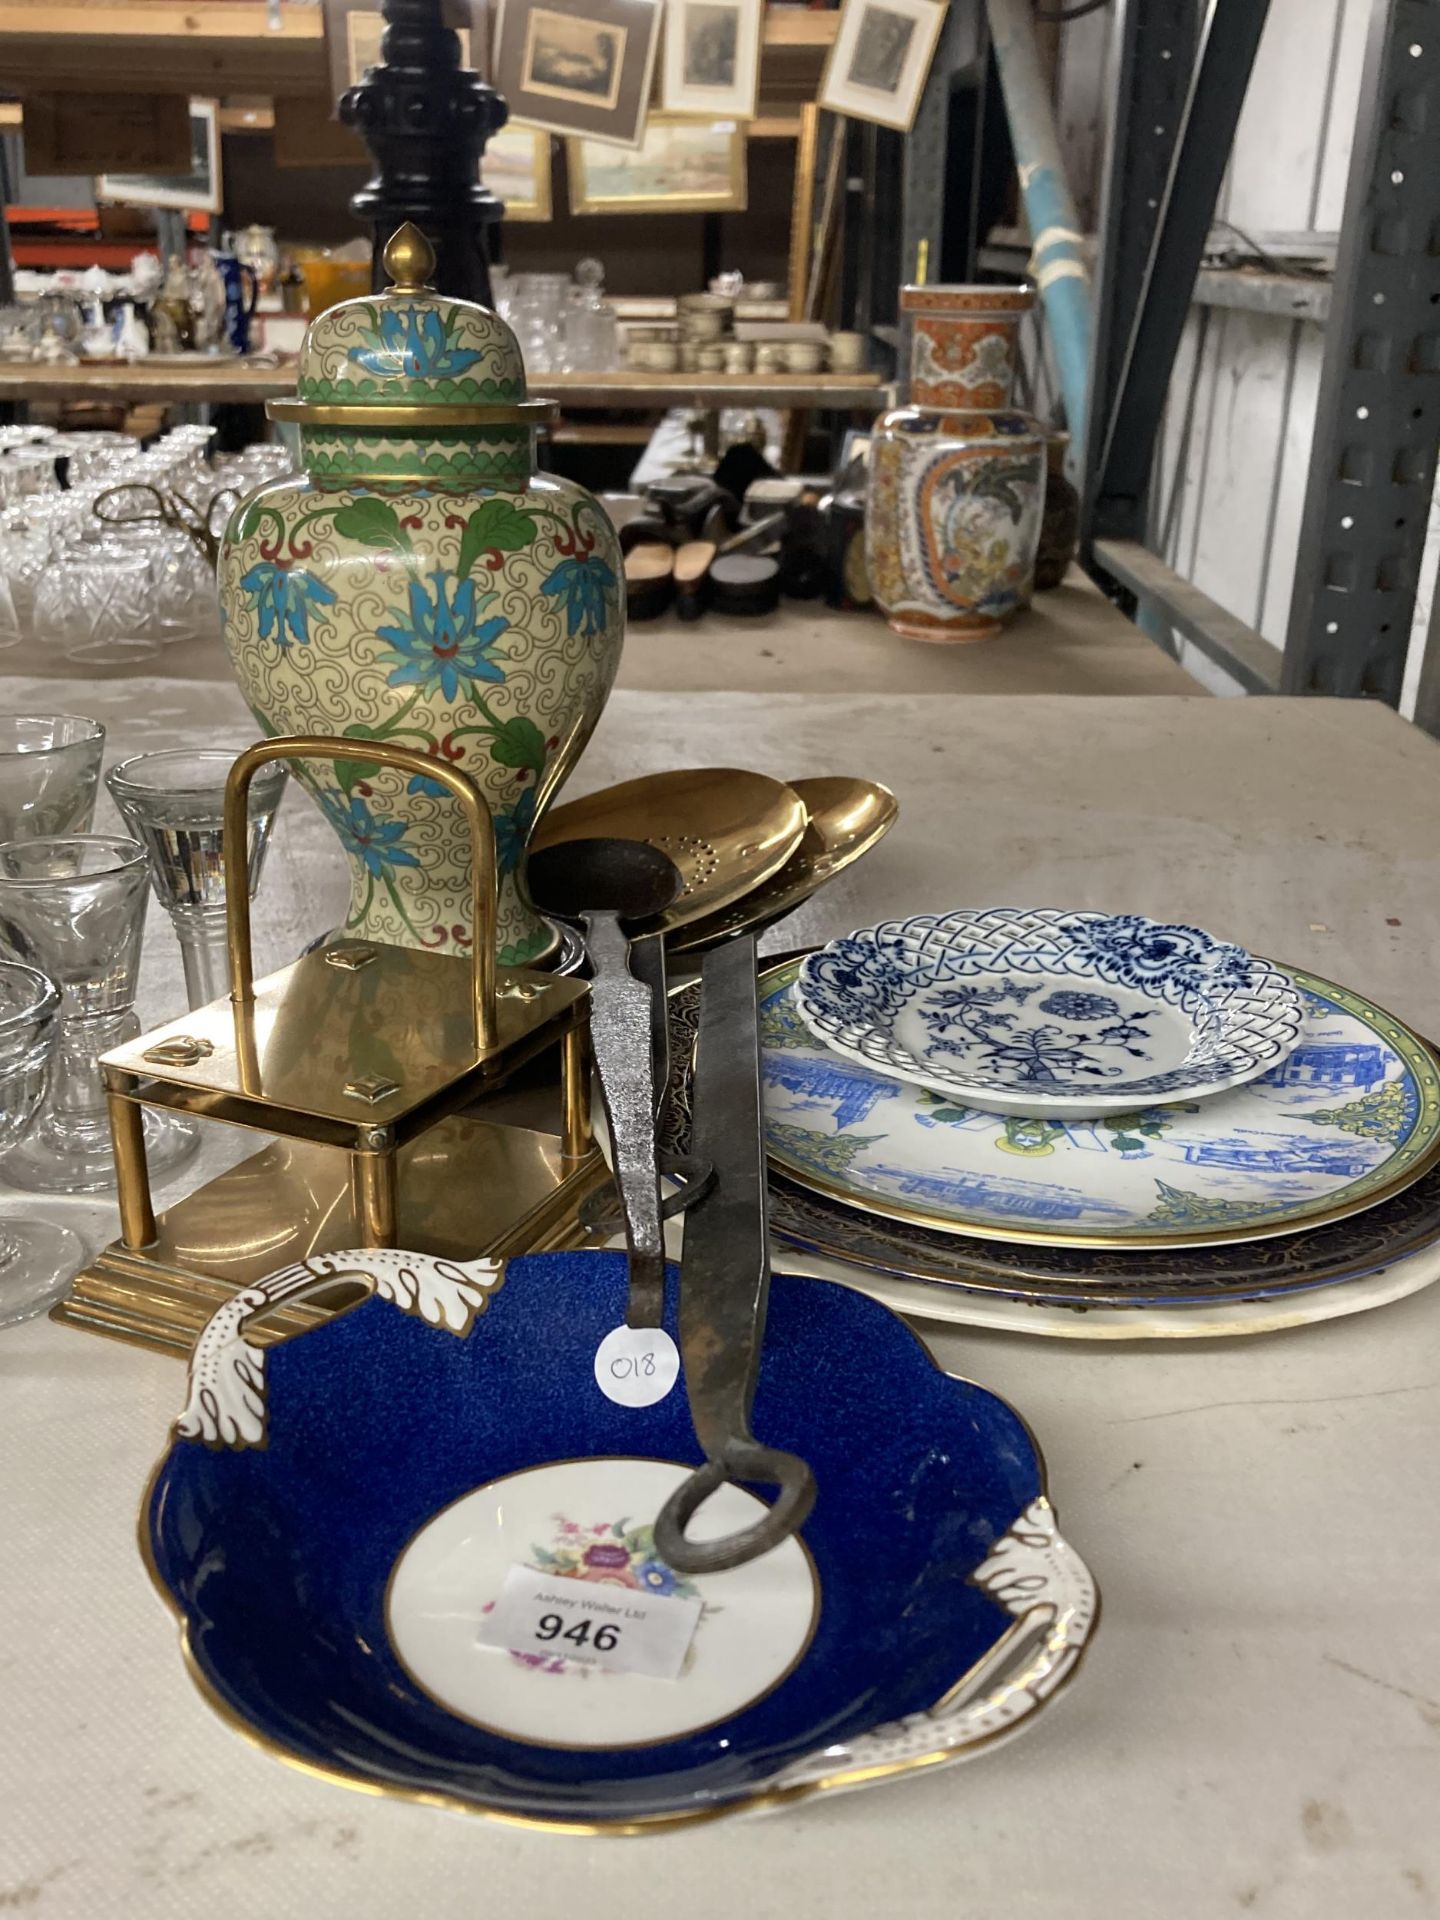 A MIXED LOT TO INCLUDE A CLOISONNE VASE ON A WOODEN BASE, BRASS SKILLET, VINTAGE GLASSES, A SODA - Image 2 of 3